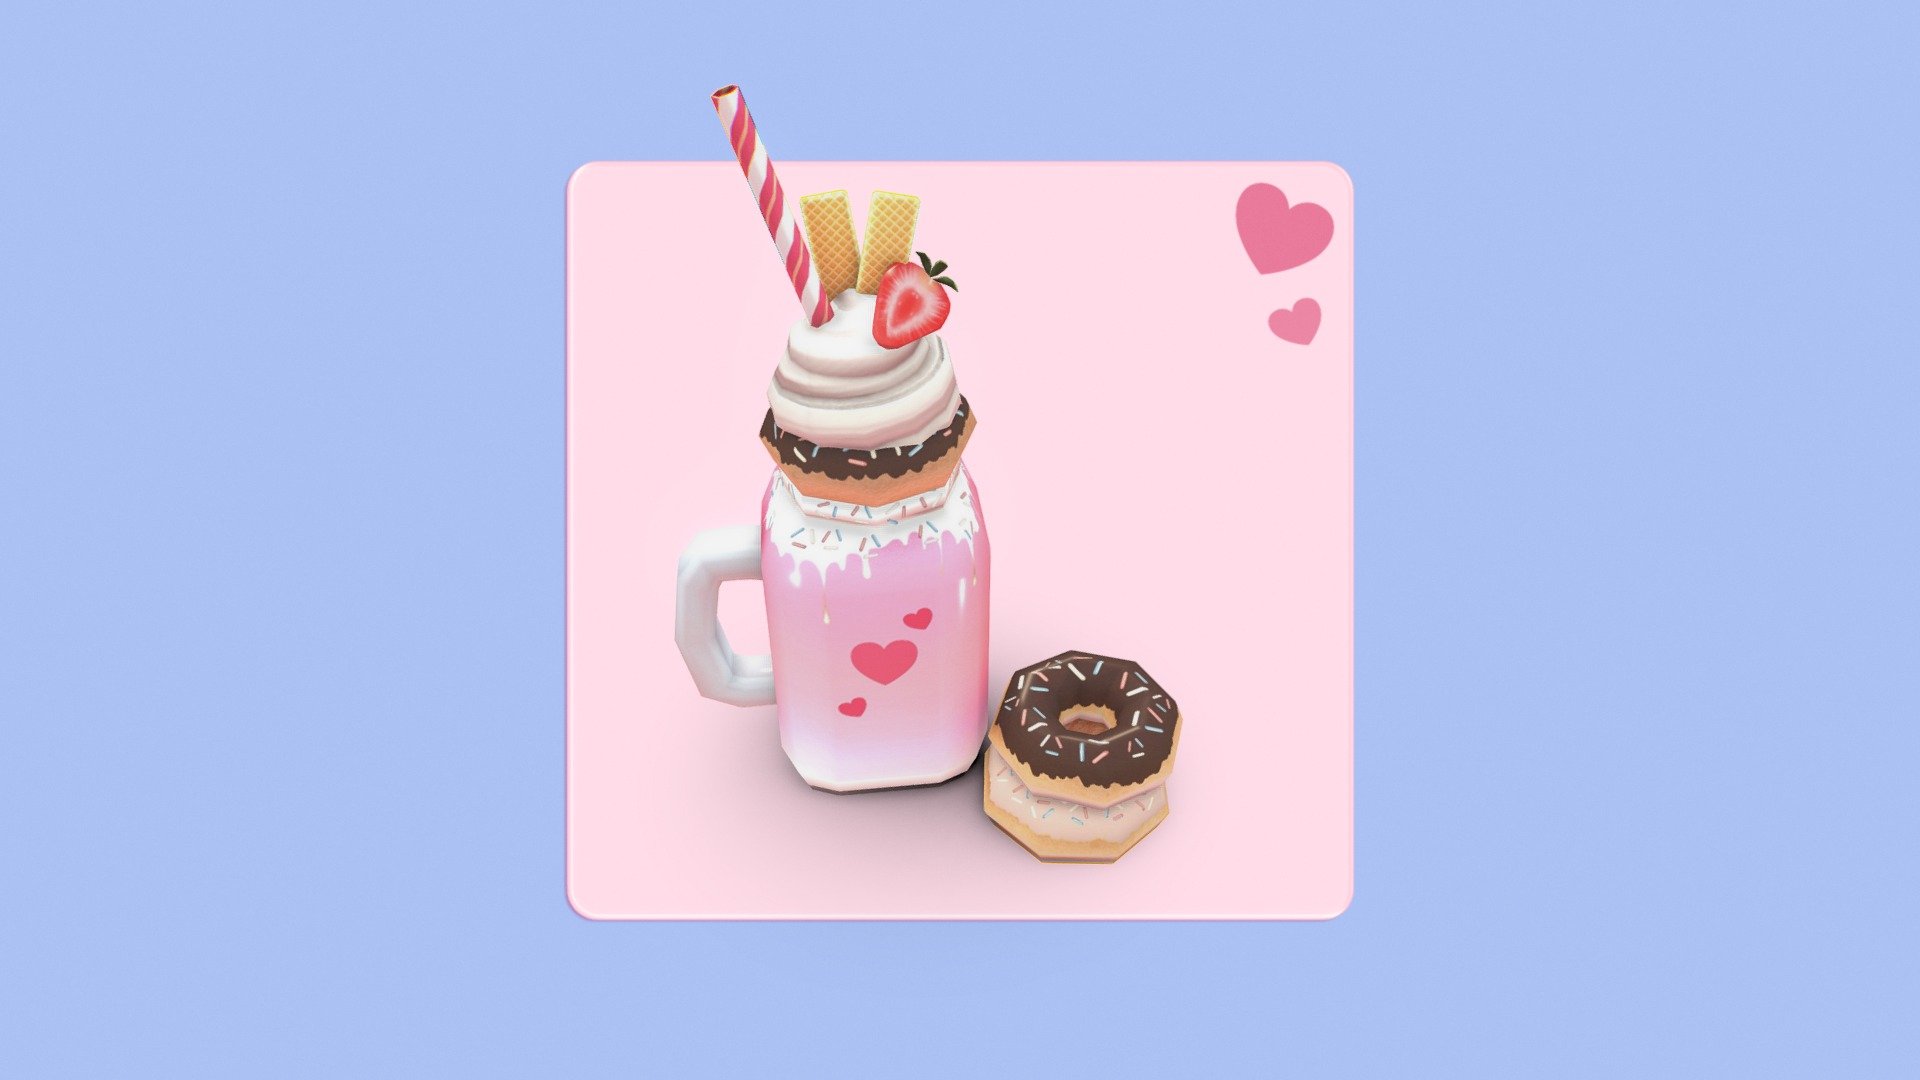 A loaded shake for the LowPoly Dessert Challenge! I modeled in Cinema 4D, textured in Substance Painter and Photoshop.

Music by: https://www.youtube.com/watch?v=pinbZB7-t9Y - Loaded Milkshake #LowPolyDessertChallenge - 3D model by Cookie (@cookiepop) 3d model